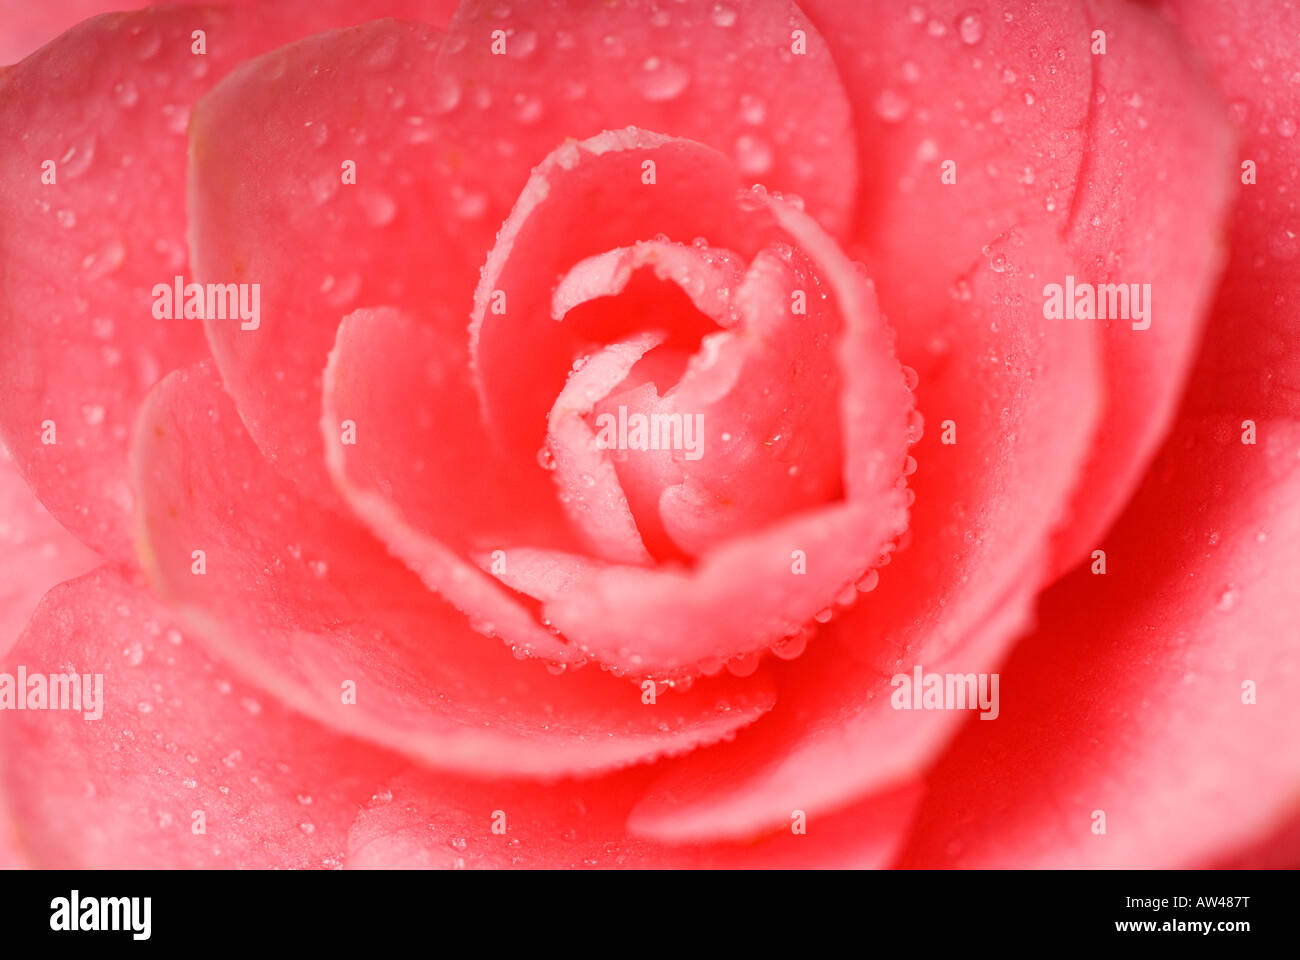 Stock photo of a close up shot of a pink camellia flower Stock Photo